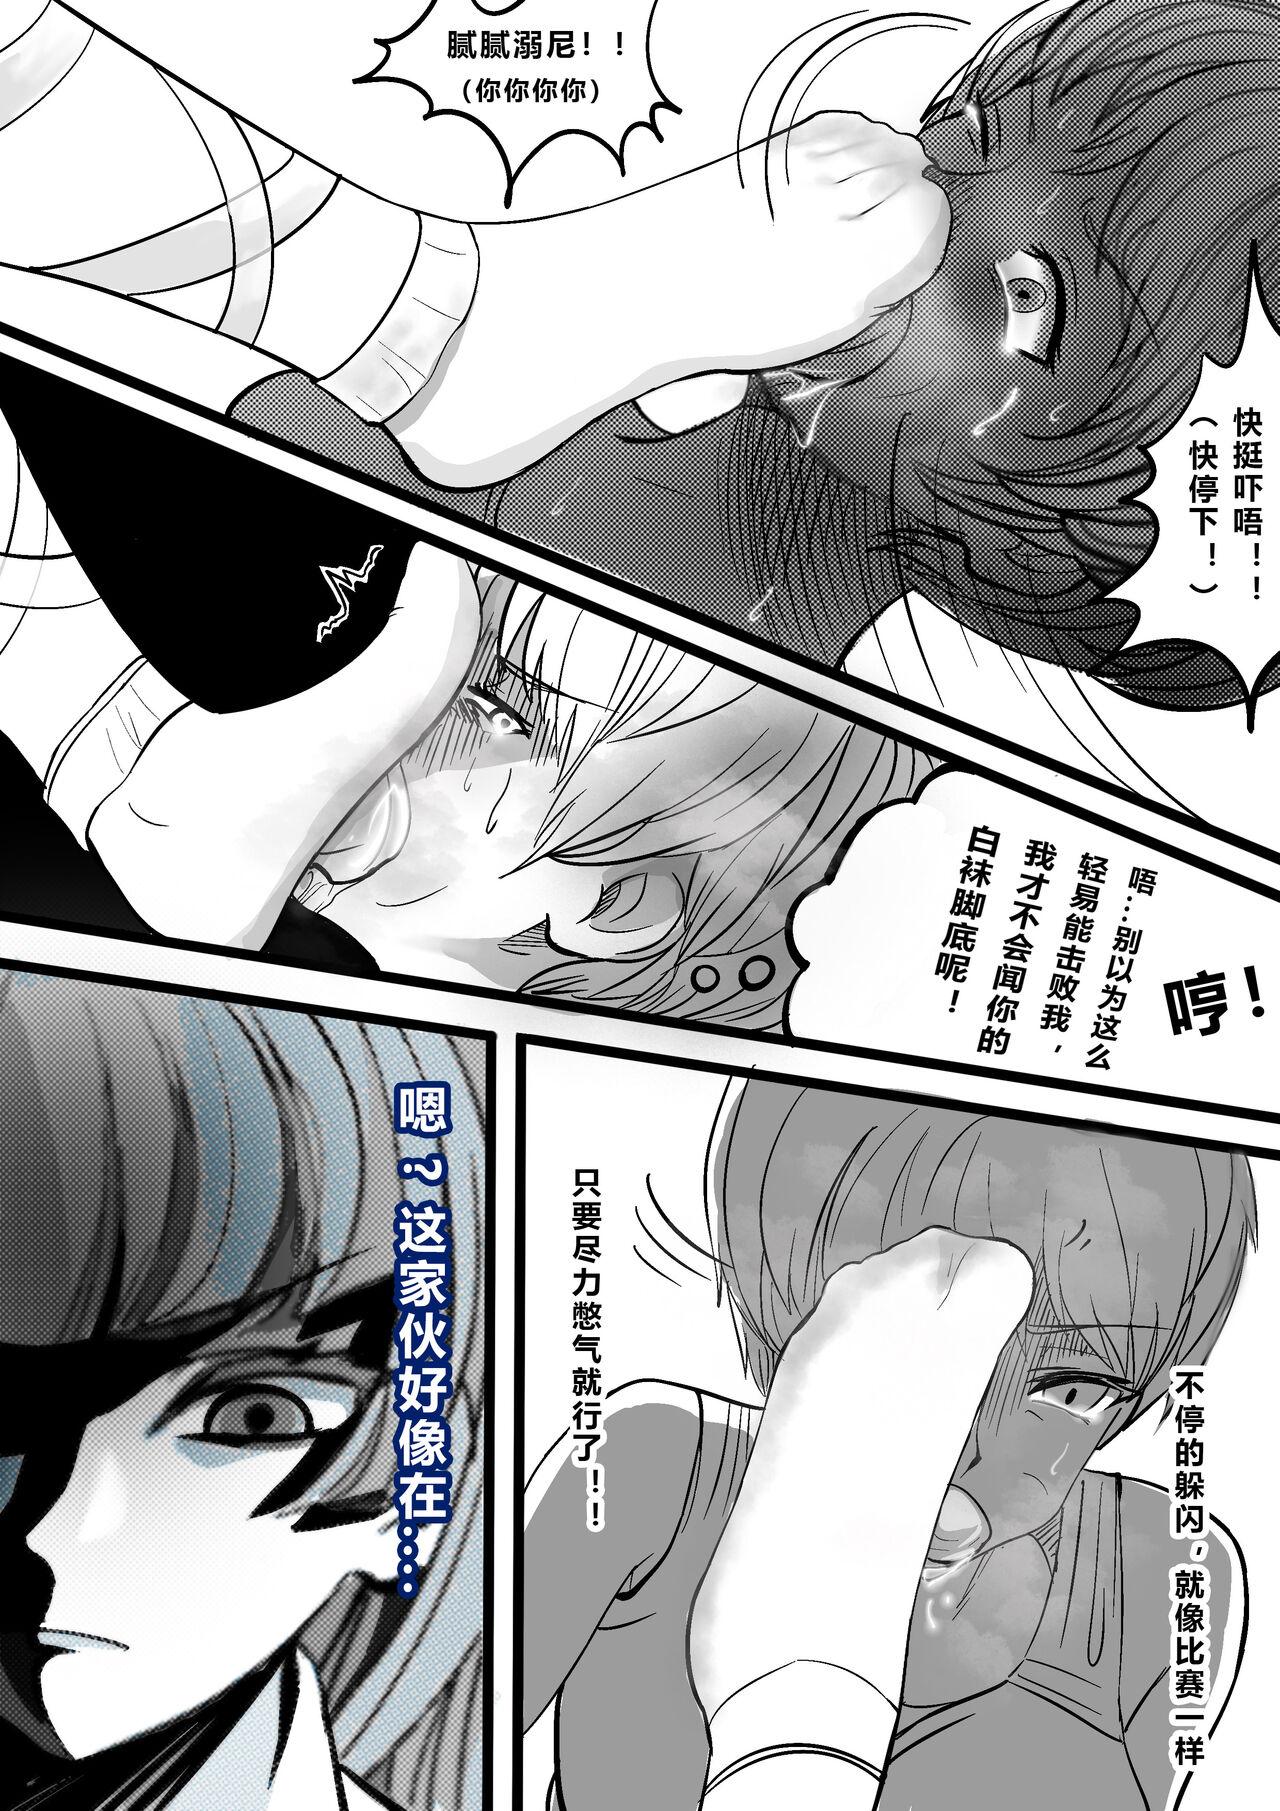 GOAT-goat Ⅱ special chapter 15